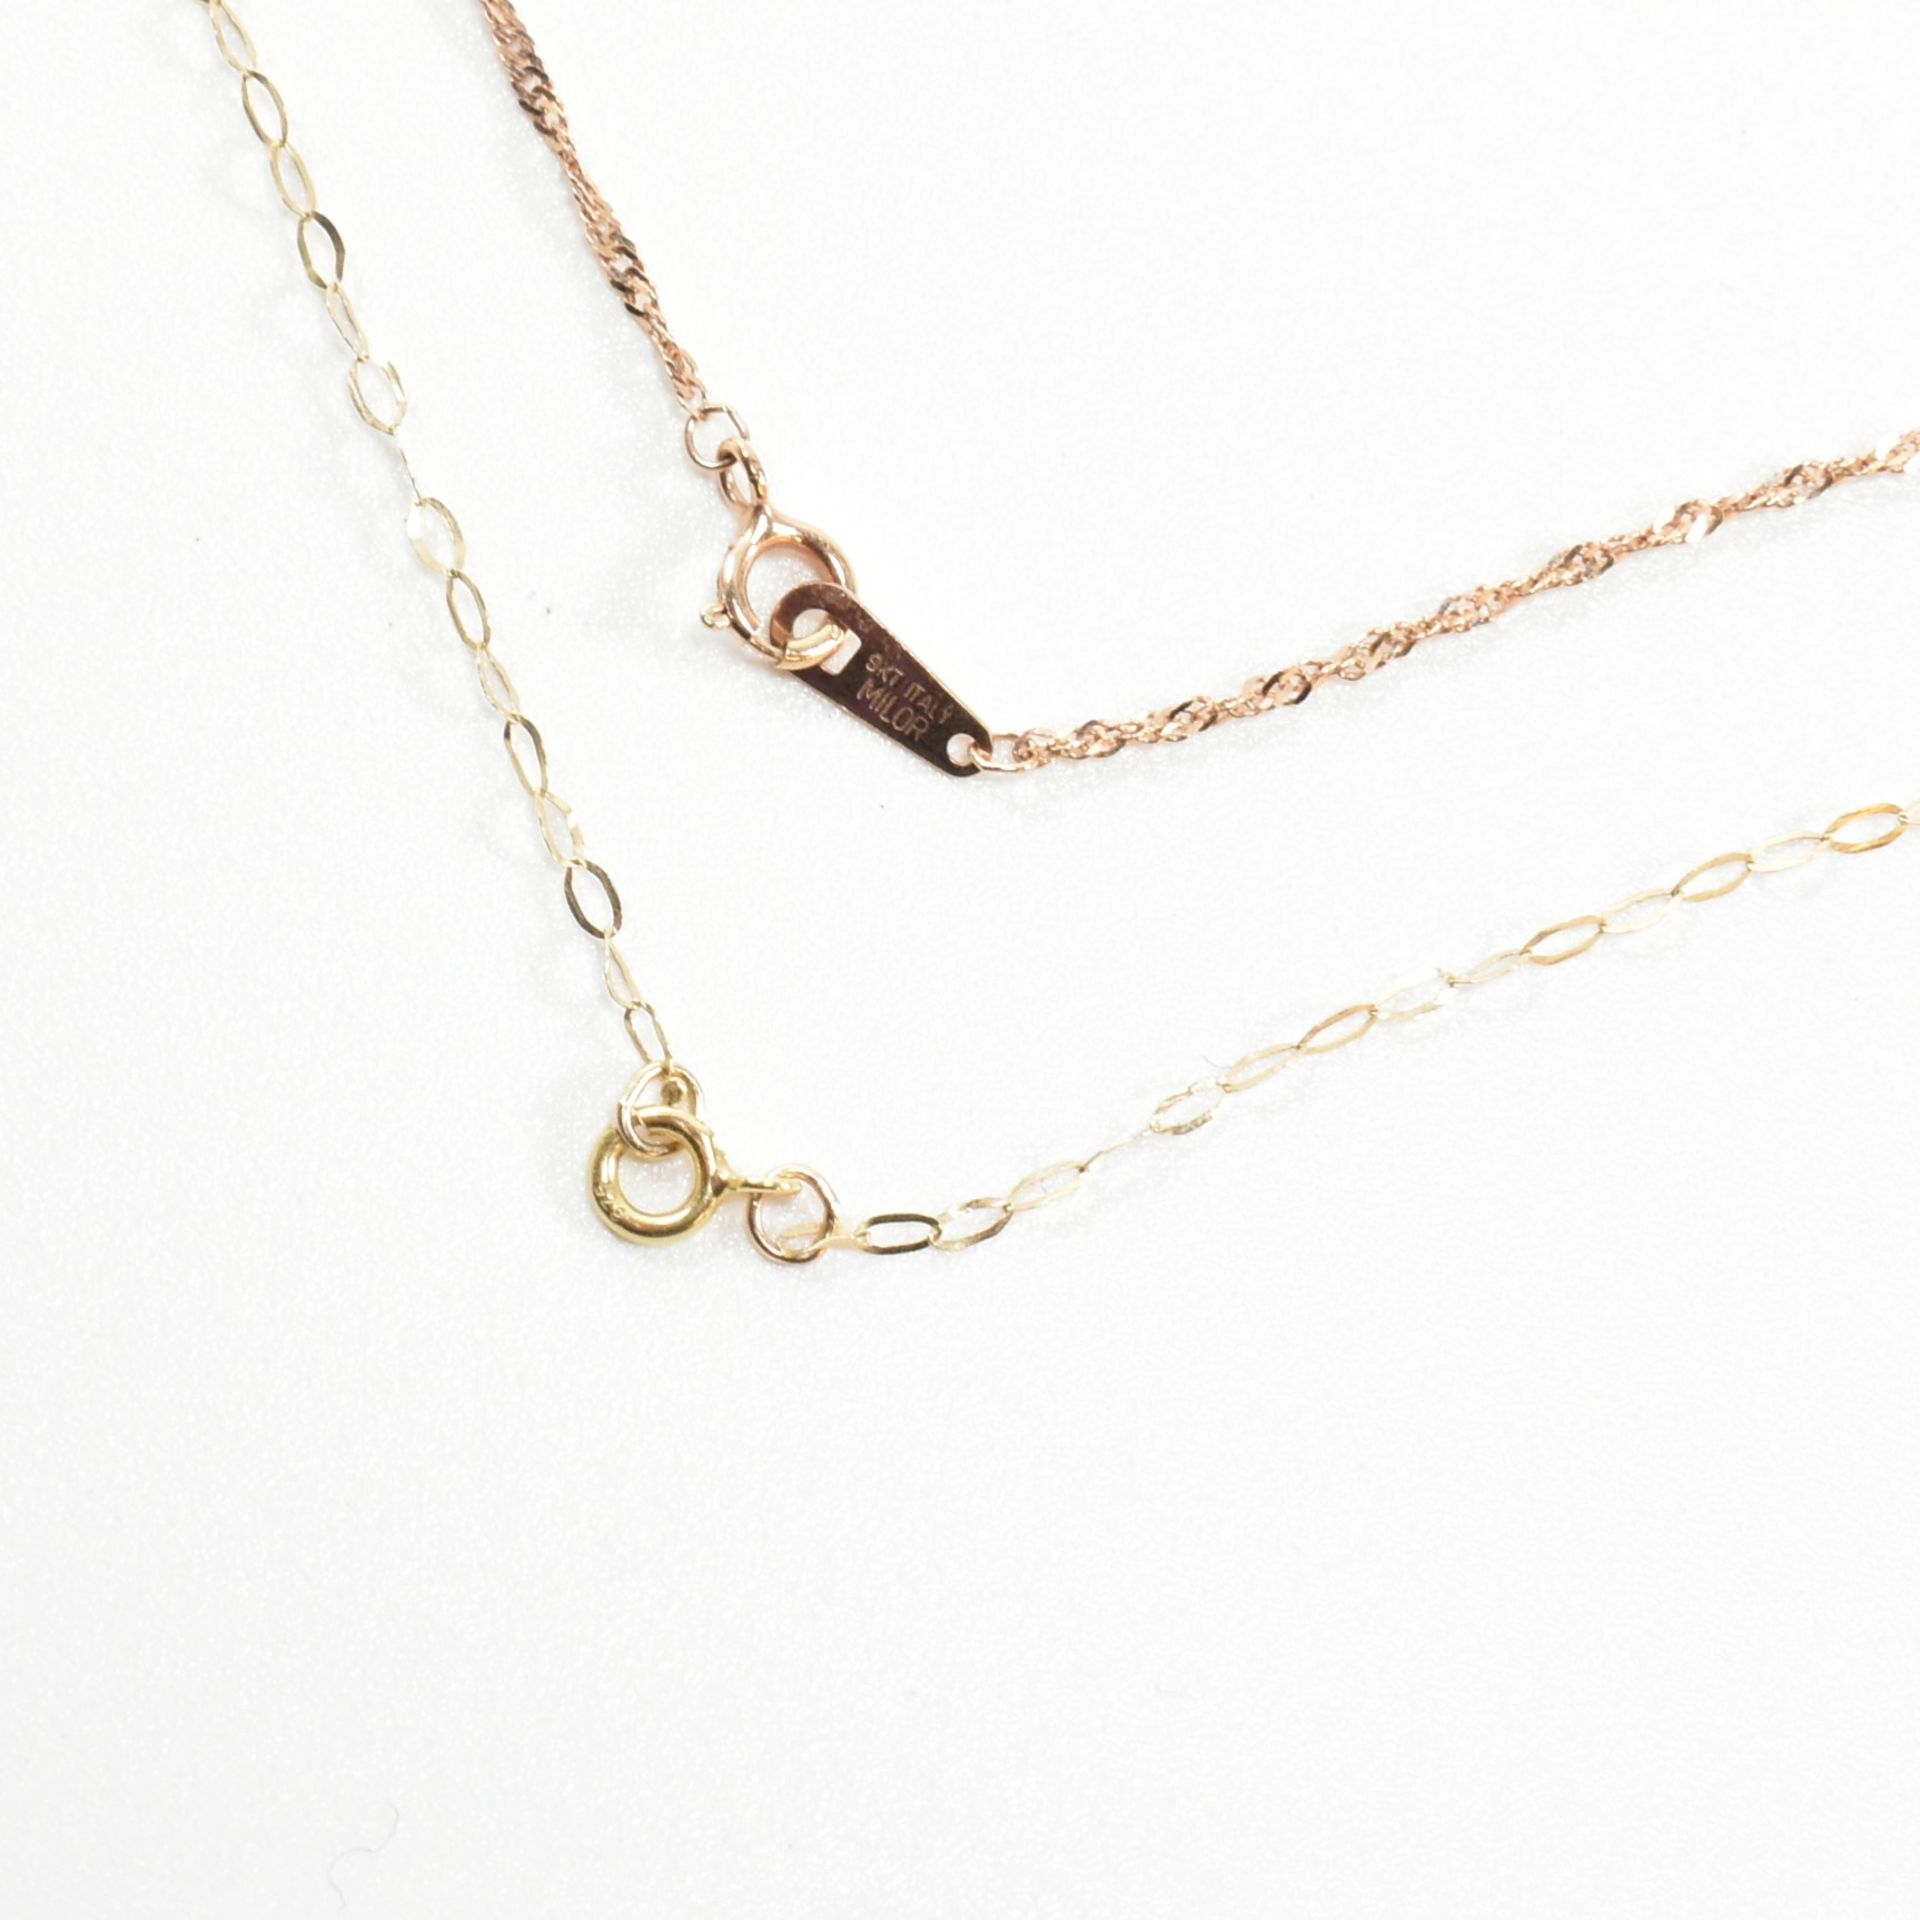 9CT ROSE GOLD PENDANT NECKLACE & 9CT YELLOW GOLD & GEM SET PENDANT NECKLACE - Image 5 of 6